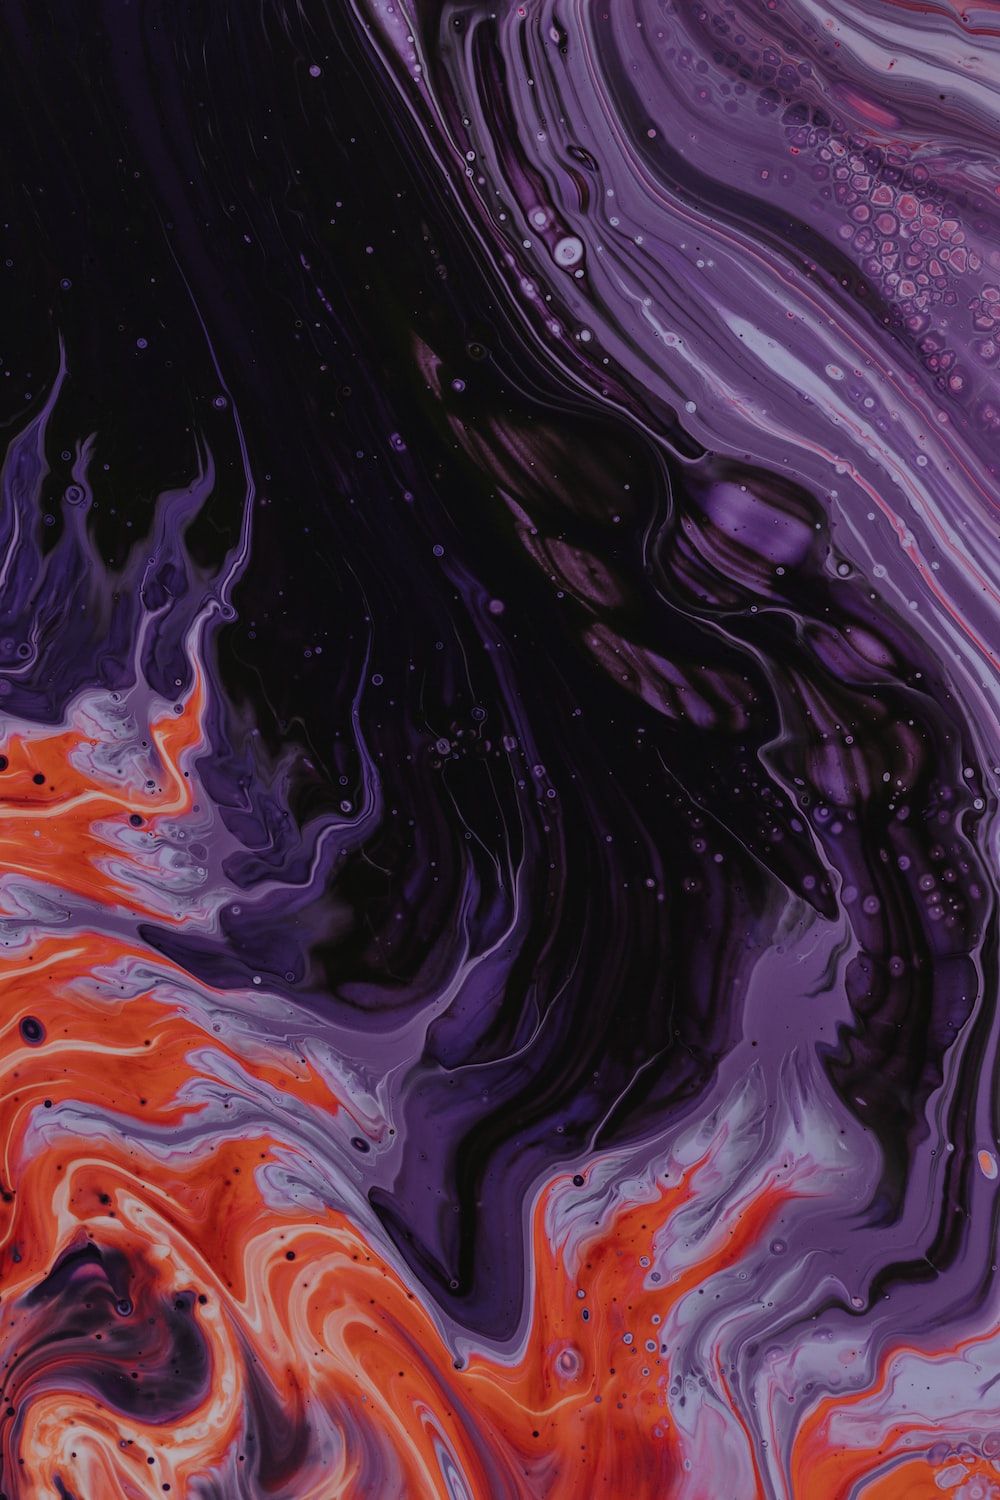 A close up of an orange and purple liquid - Star Wars